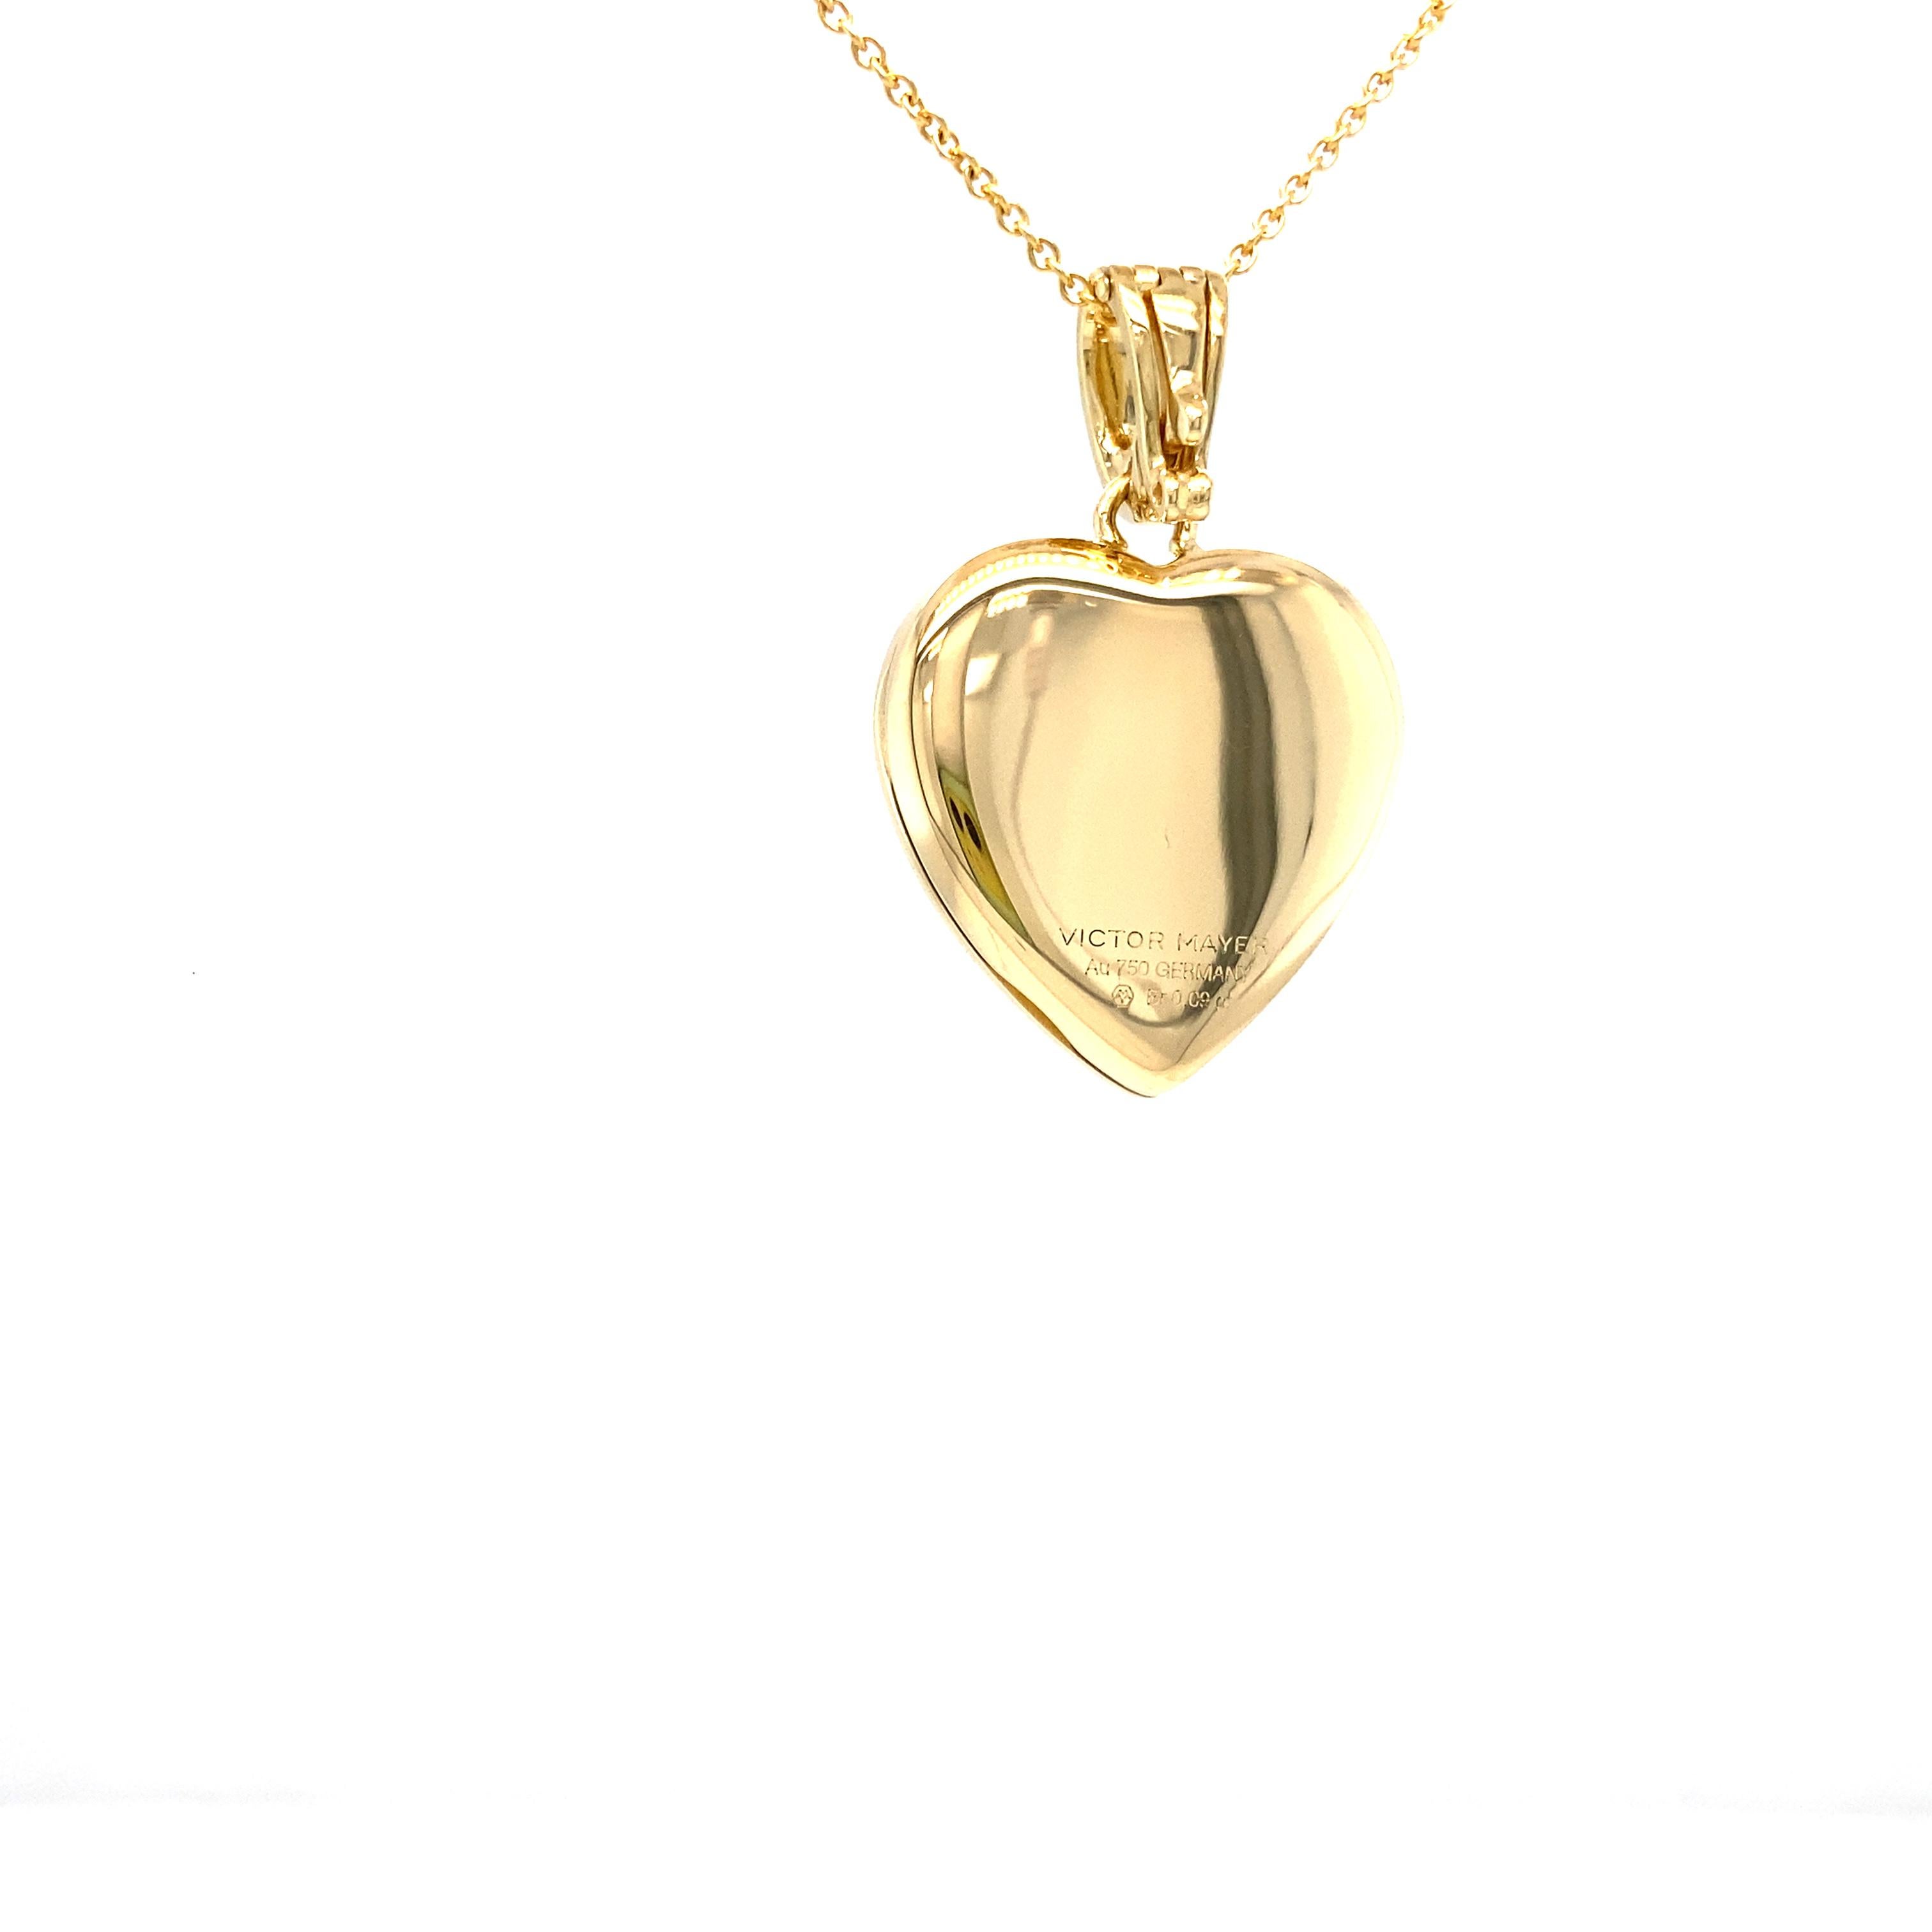 Contemporary Heart Locket Pendant - Polished 18k Yellow Gold - 6 Diamonds 0.09 ct - Two Pics For Sale